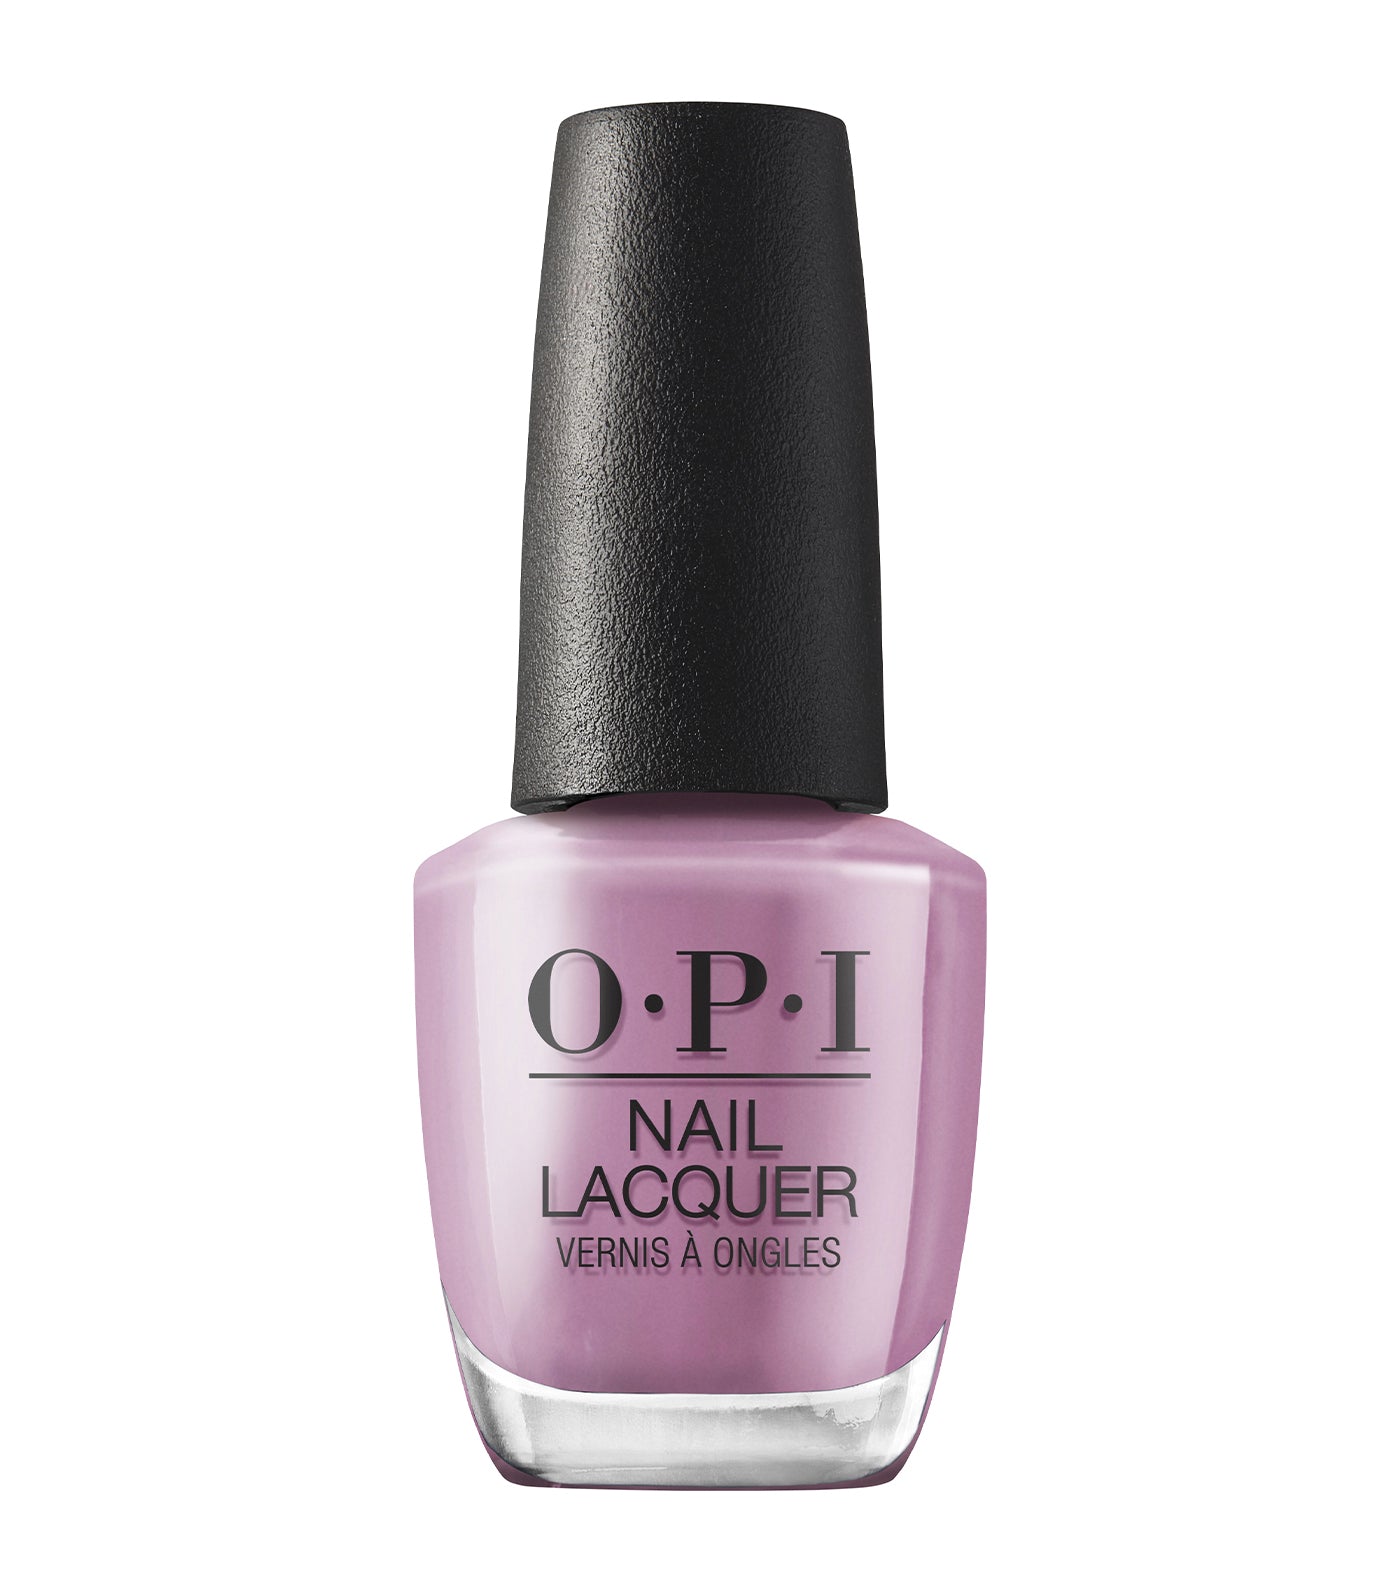 Nail Lacquer Me, Myself, and, OPI Collection - Purples